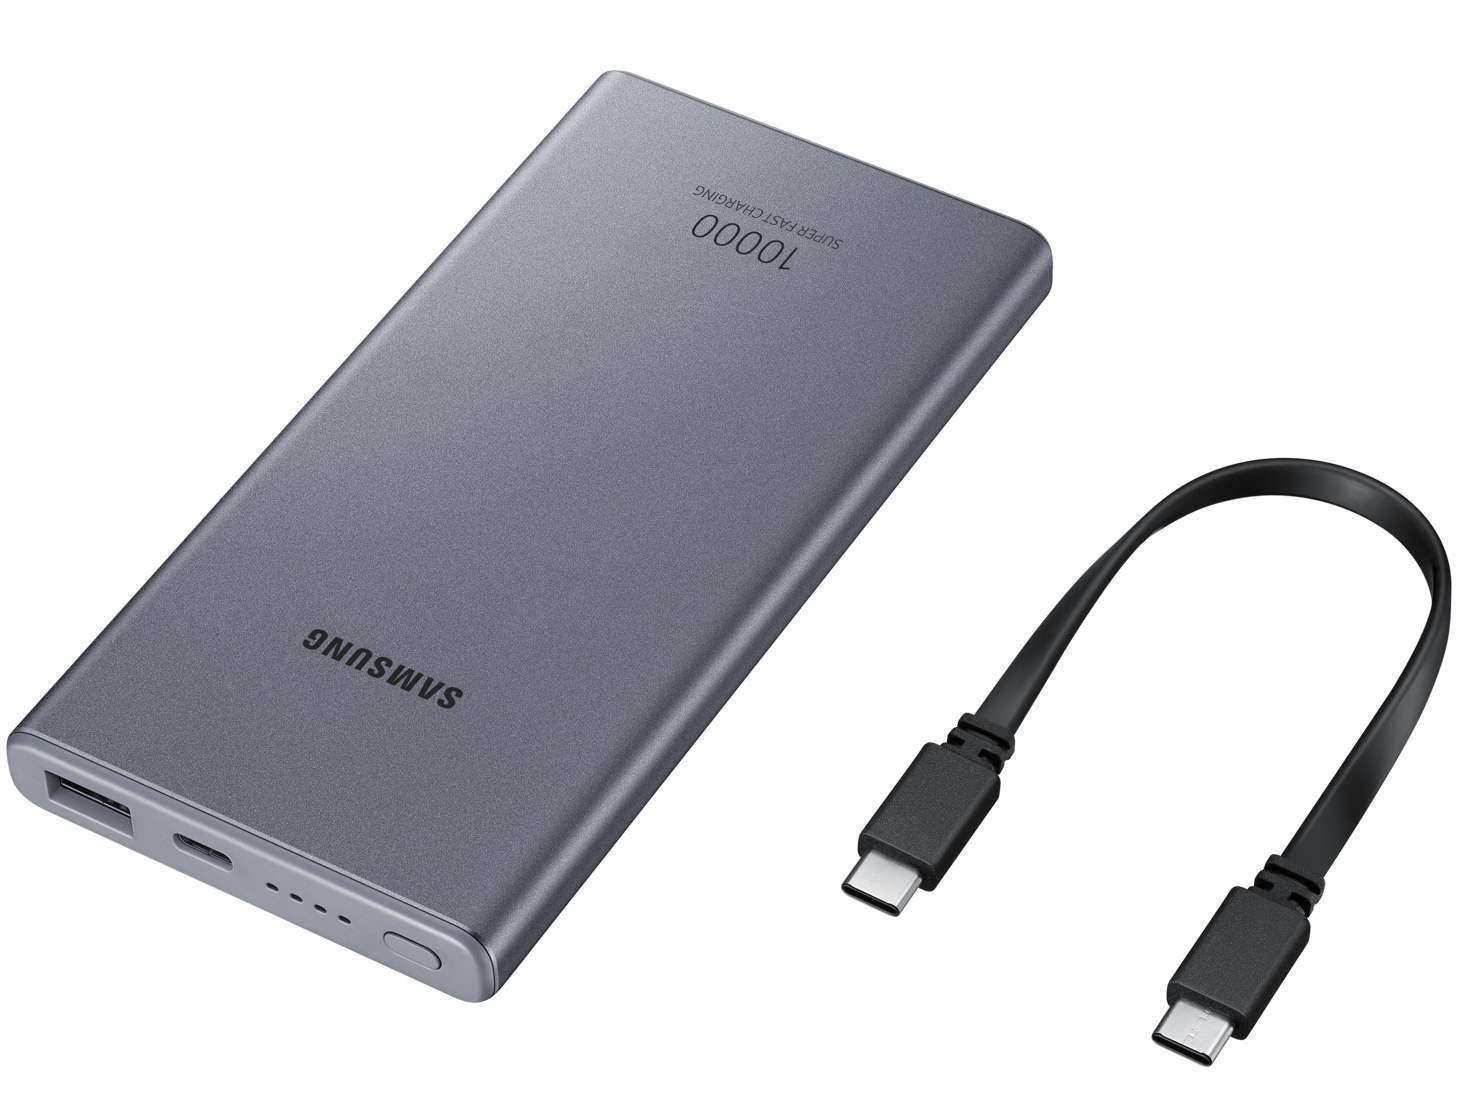 Samsung 10000mAh Fast Charge Portable Power Bank Review